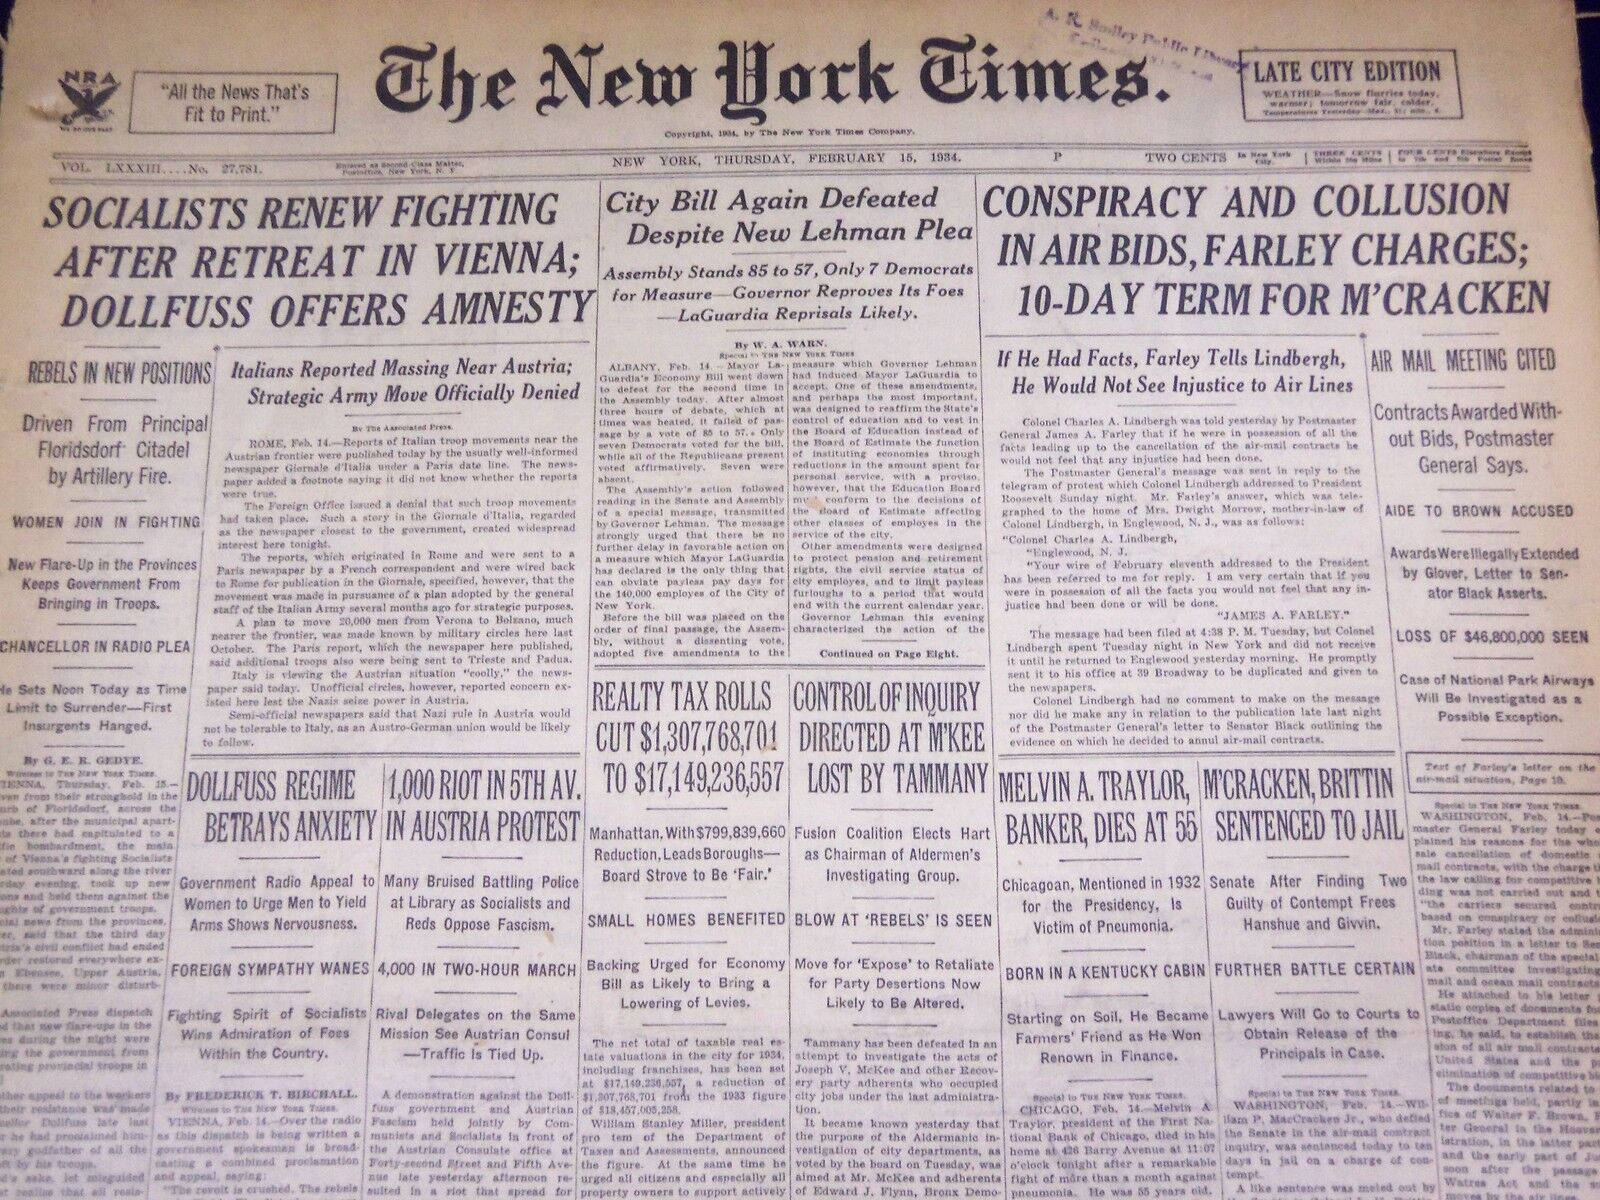 1934 FEB 15 NEW YORK TIMES - SOCIALISTS RENEW FIGHTING AFTER RETREAT - NT 1607